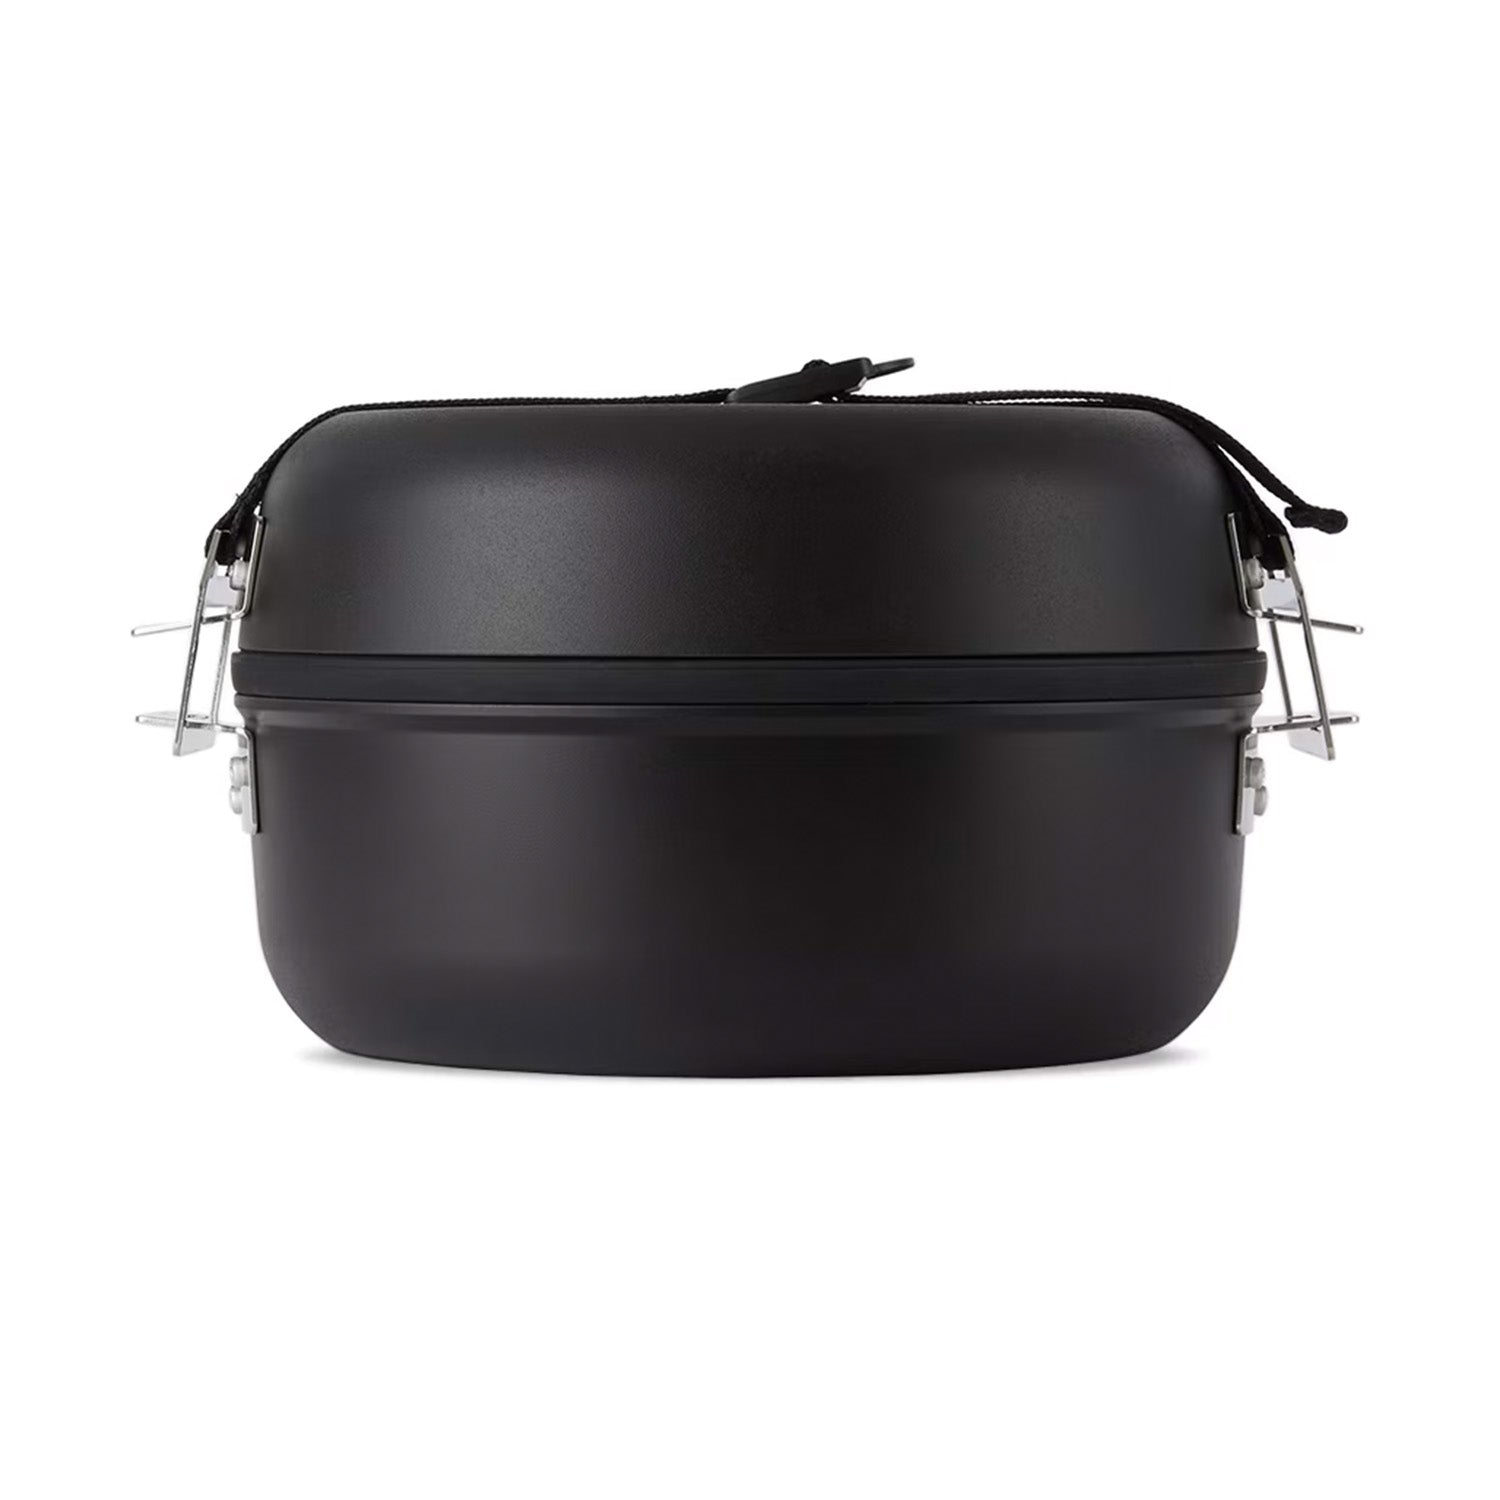 Home & Camp Cooker 19 Stowed